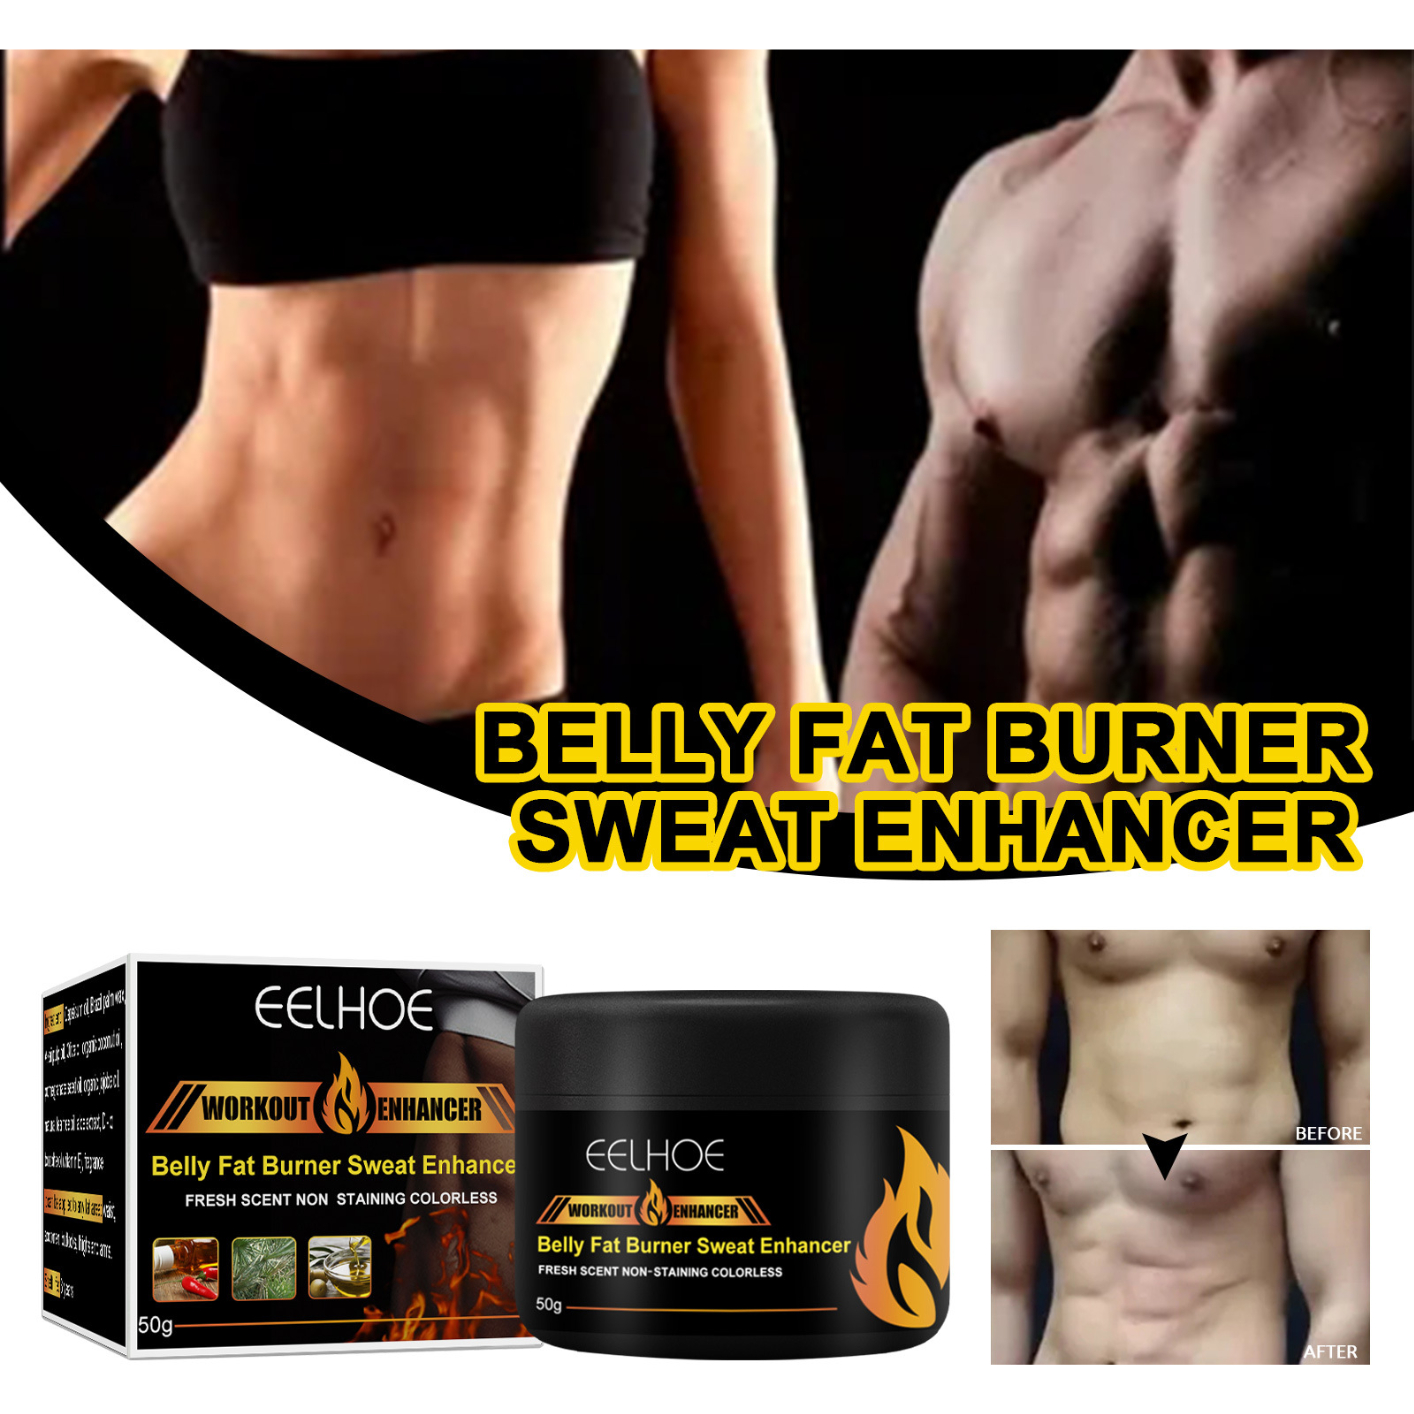 Hot Gel Cream, Fat Burning Cream for Belly, Cellulite Firming & Slimming Cream for Men and Women, Weight Loss Slimming Workout Enhancer, Cellulite Treatment for Thighs, Legs, Abdomen, Arms and Buttocks